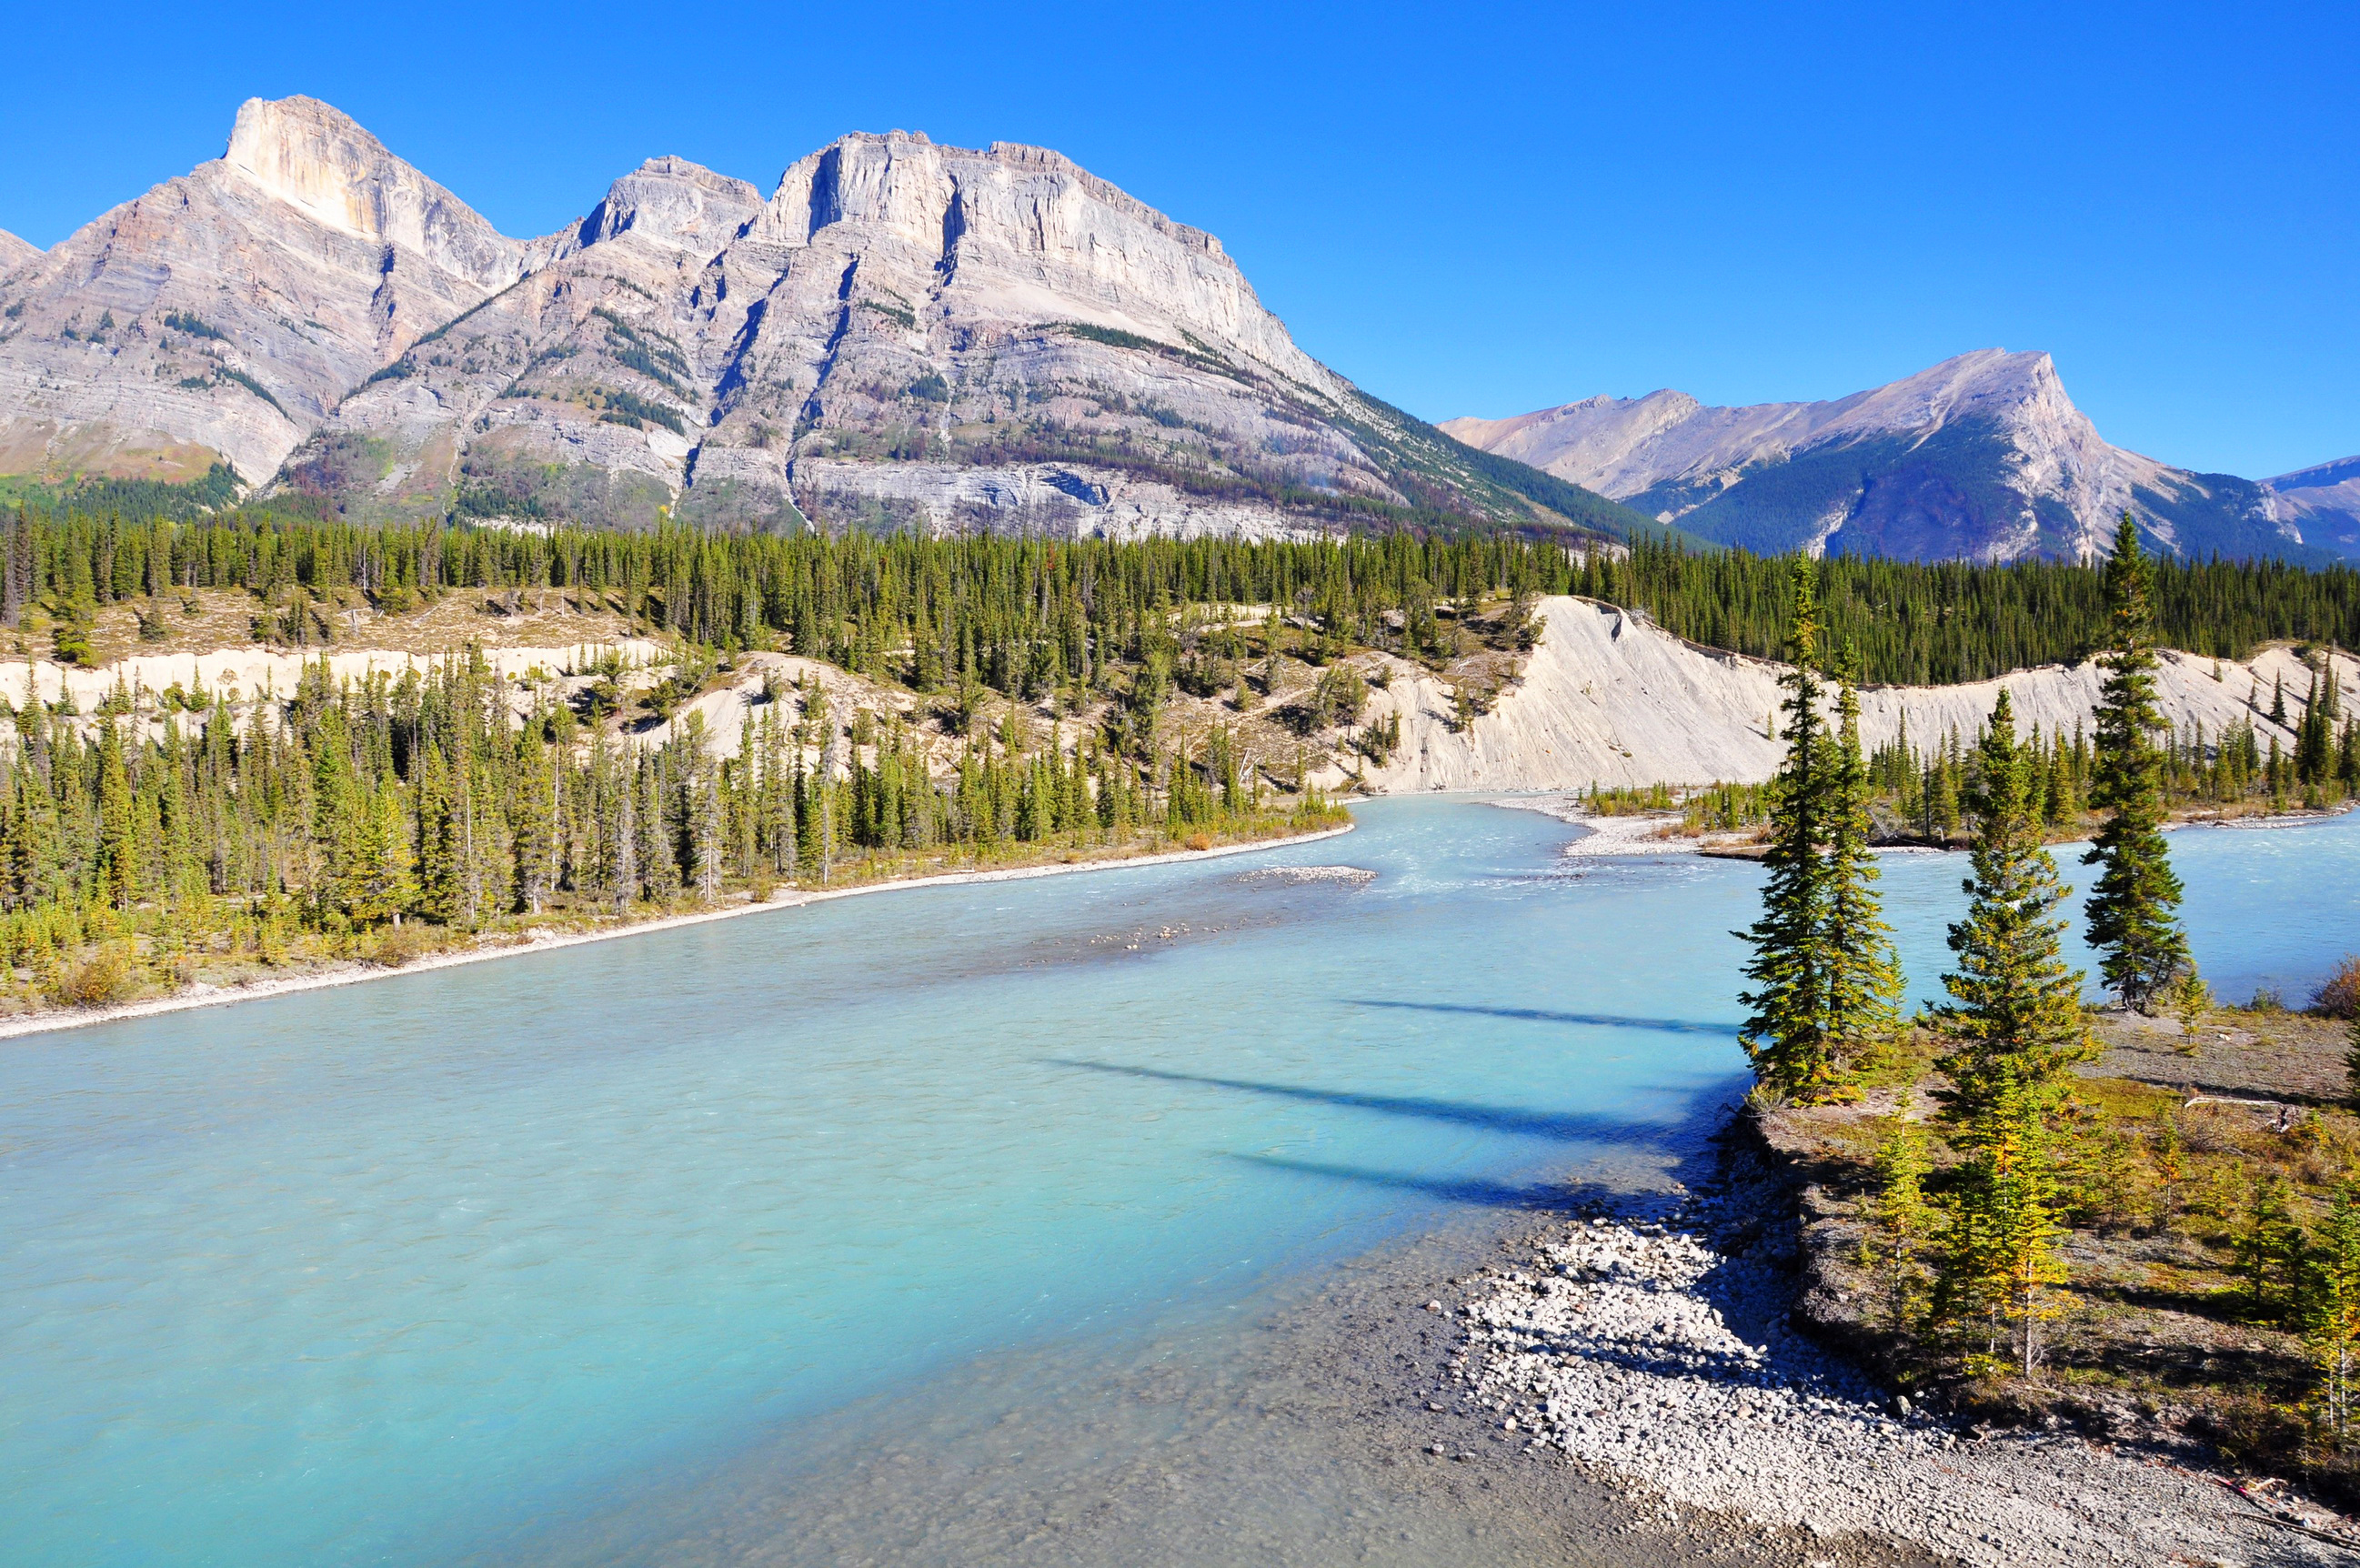 earth, river, banff national park, canada, forest, landscape, mountain, nature